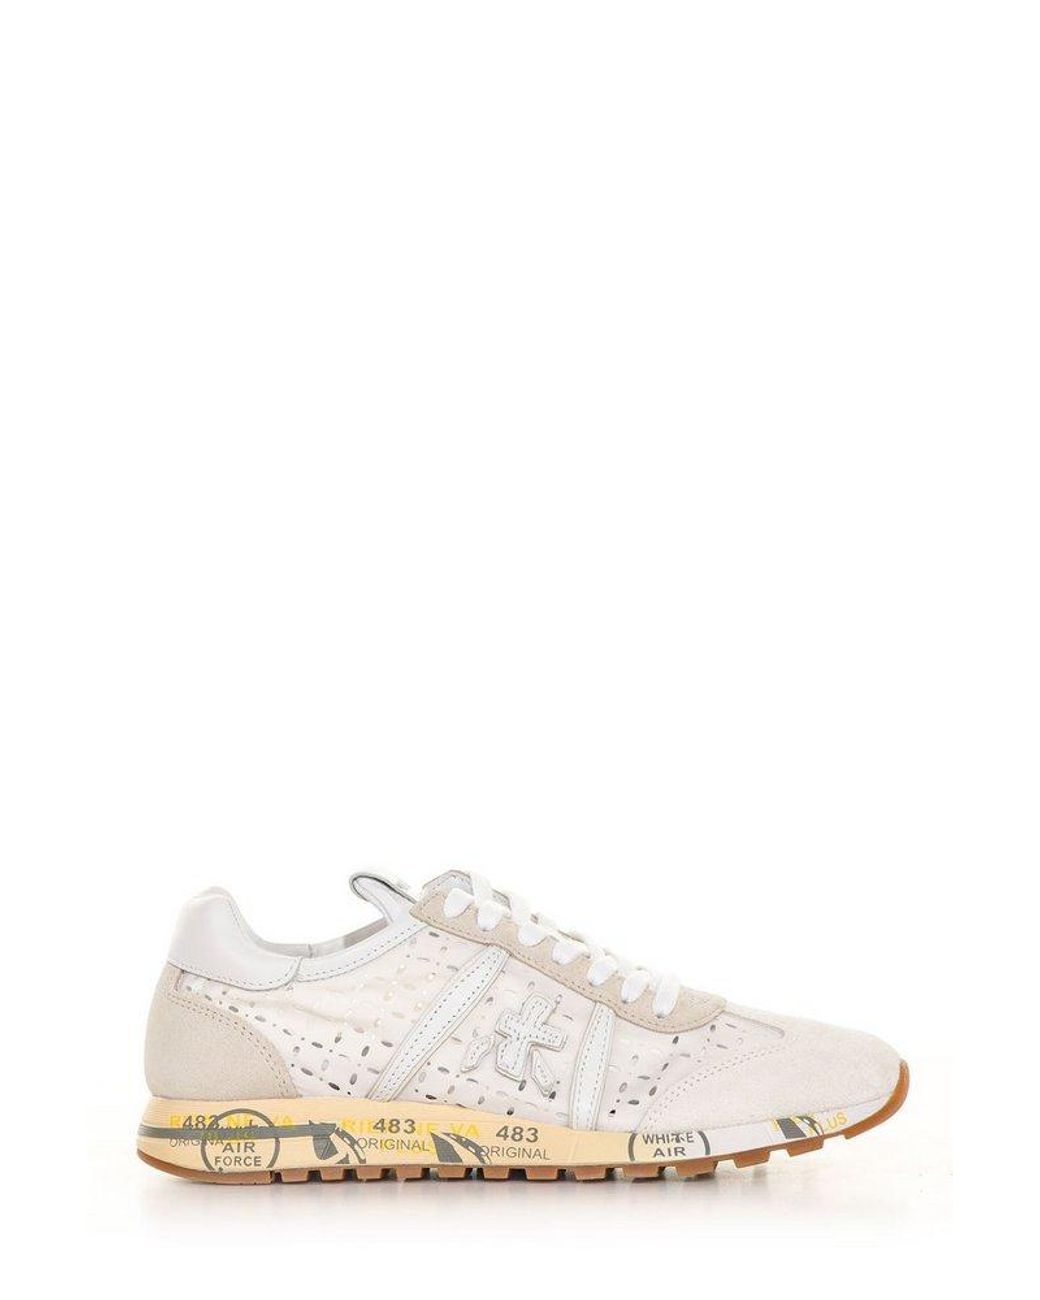 Premiata Lucy Lace-up Sneakers in White | Lyst